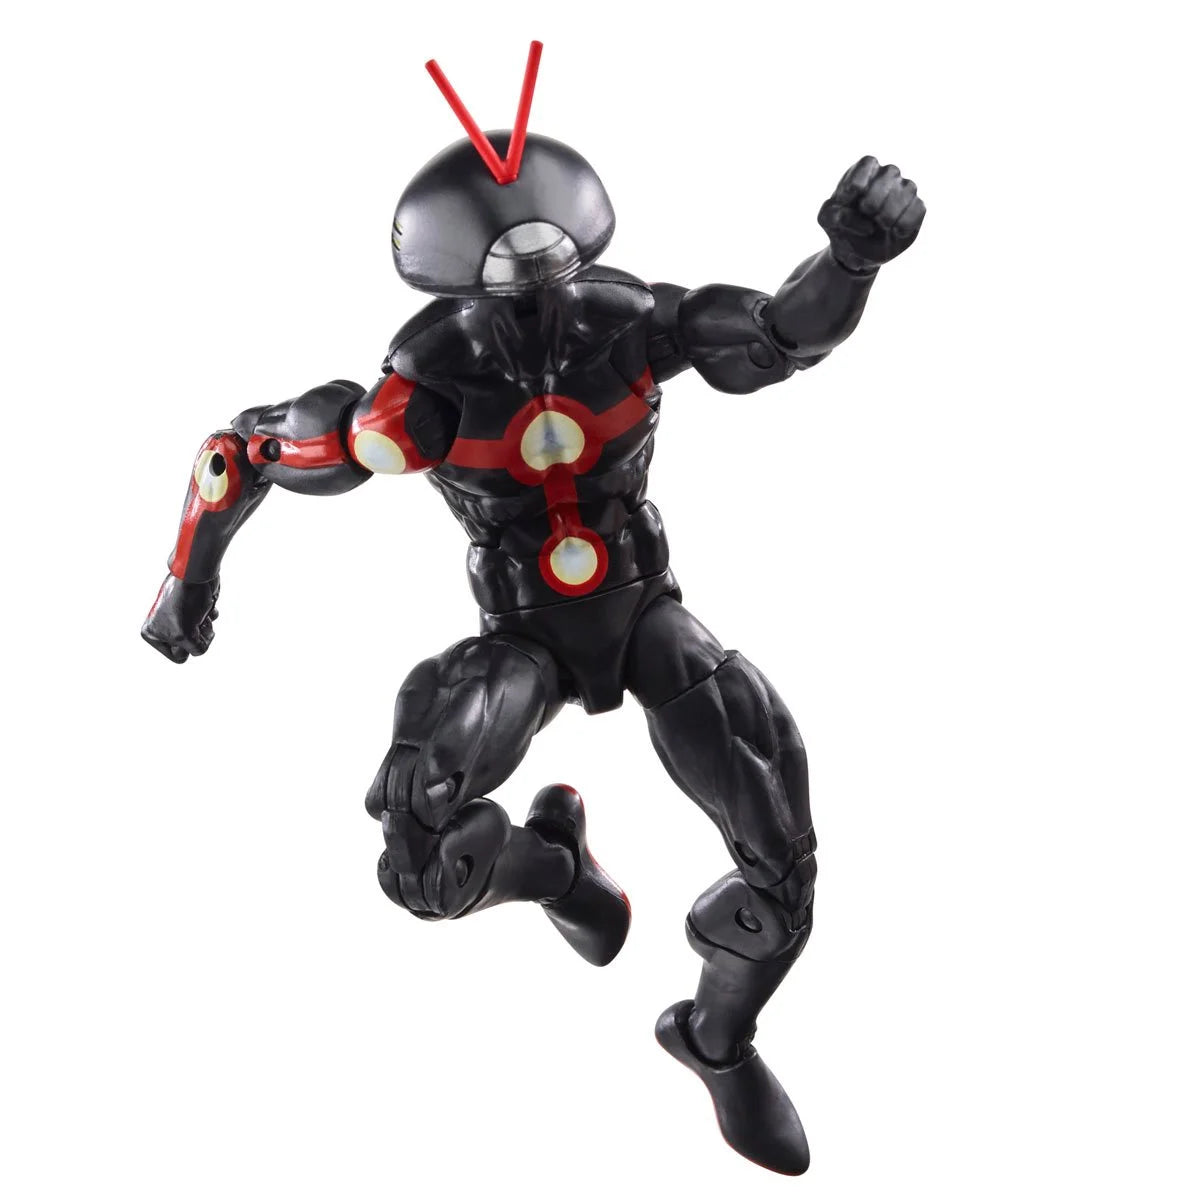 Ant-Man & the Wasp: Quantumania Marvel Legends Ant-Man 6-Inch